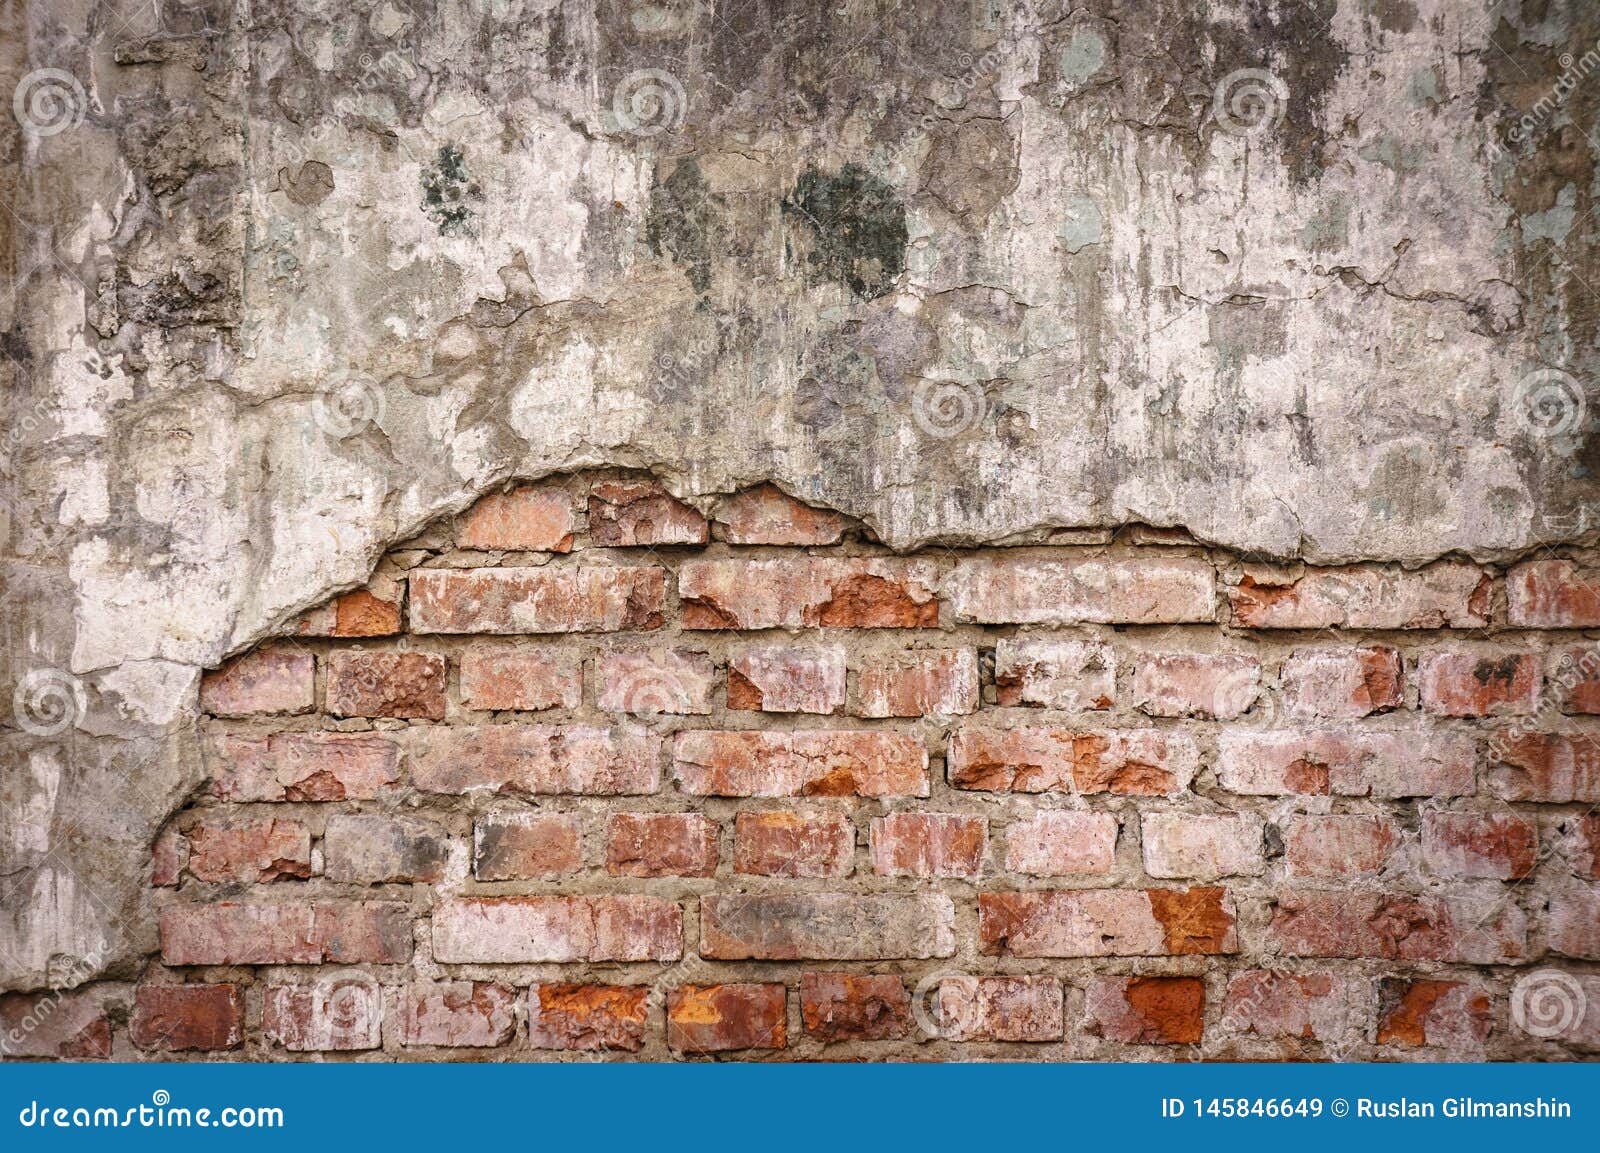 empty old brick wall texture. painted distressed wall surface. grungy wide brickwall. grunge red stonewall background